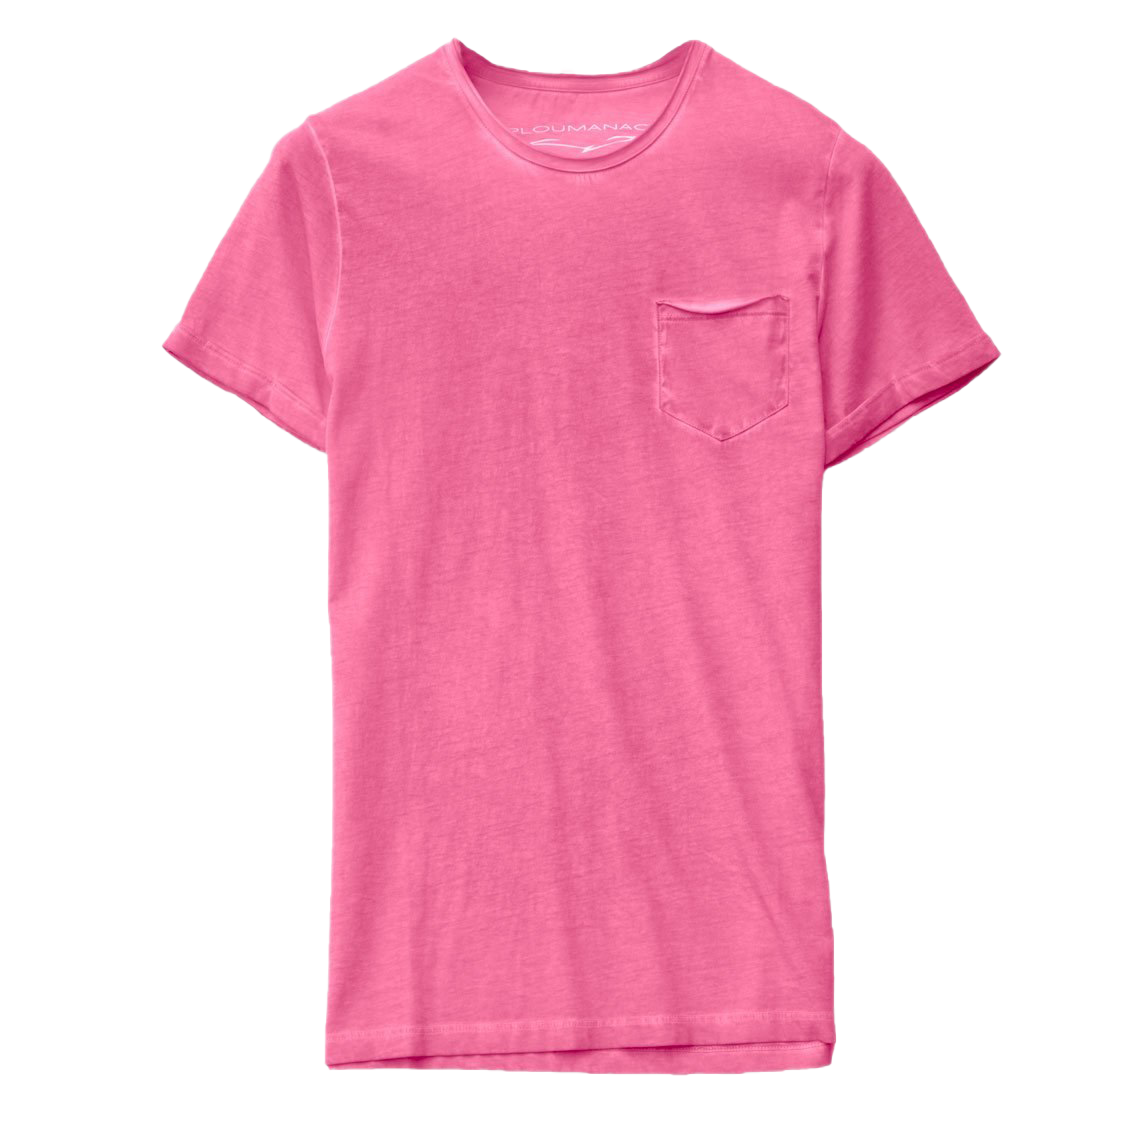 Plain Pink T-Shirt PNG Picture